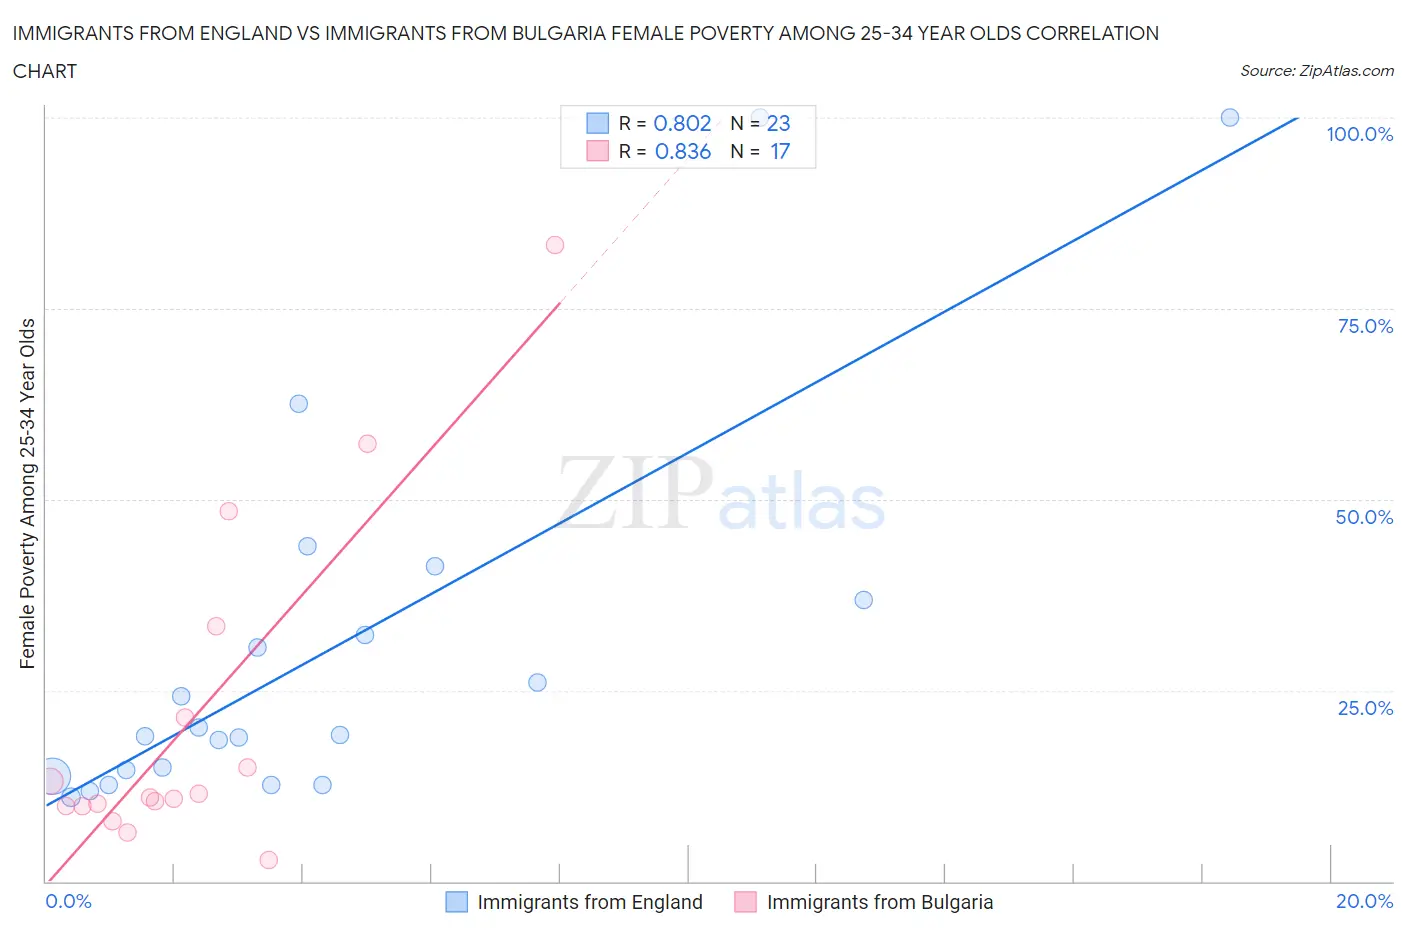 Immigrants from England vs Immigrants from Bulgaria Female Poverty Among 25-34 Year Olds